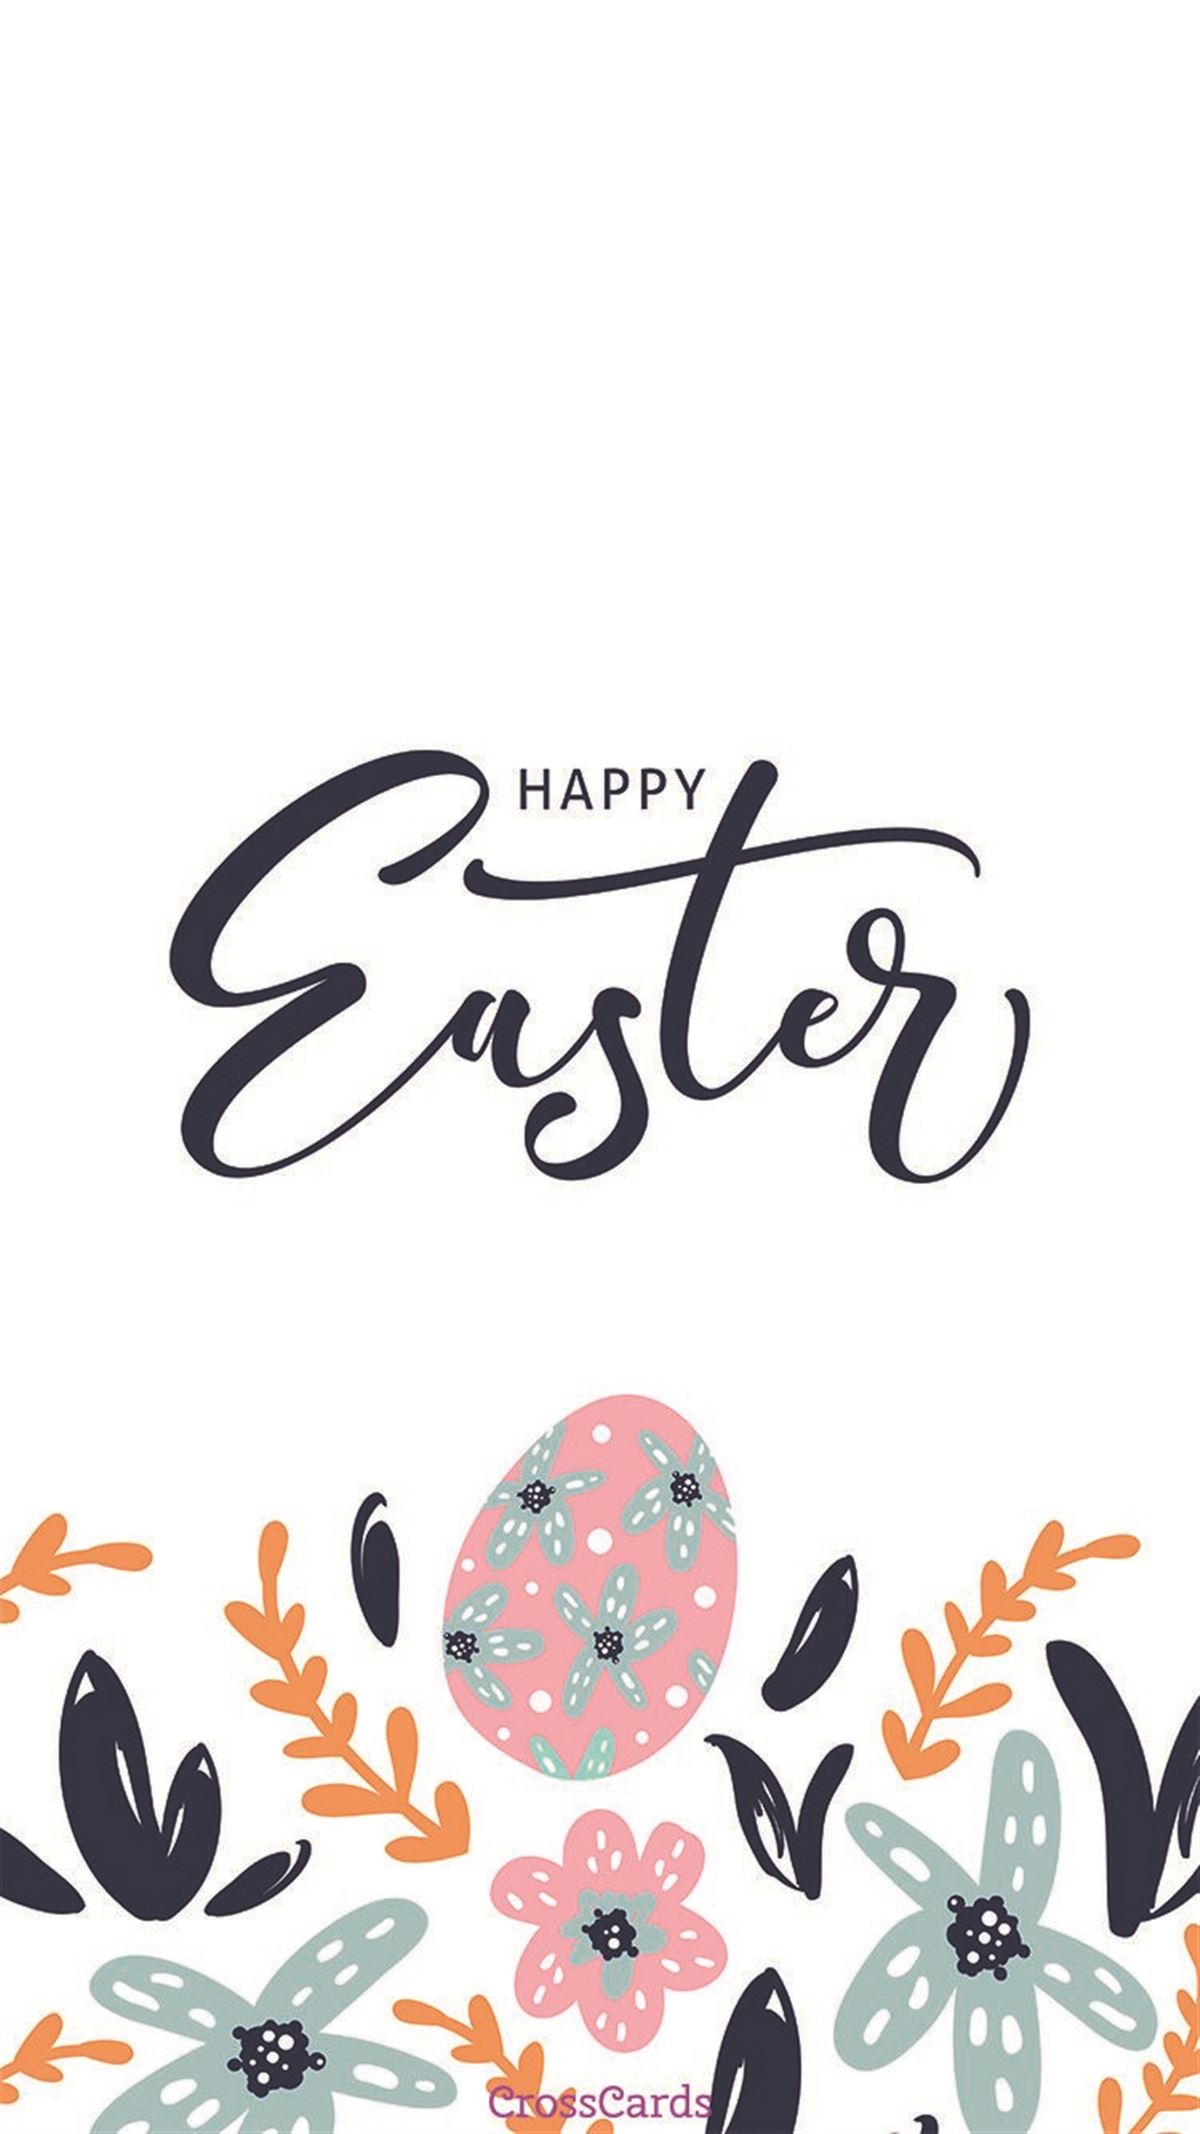 Happy Easter mobile phone wallpaper